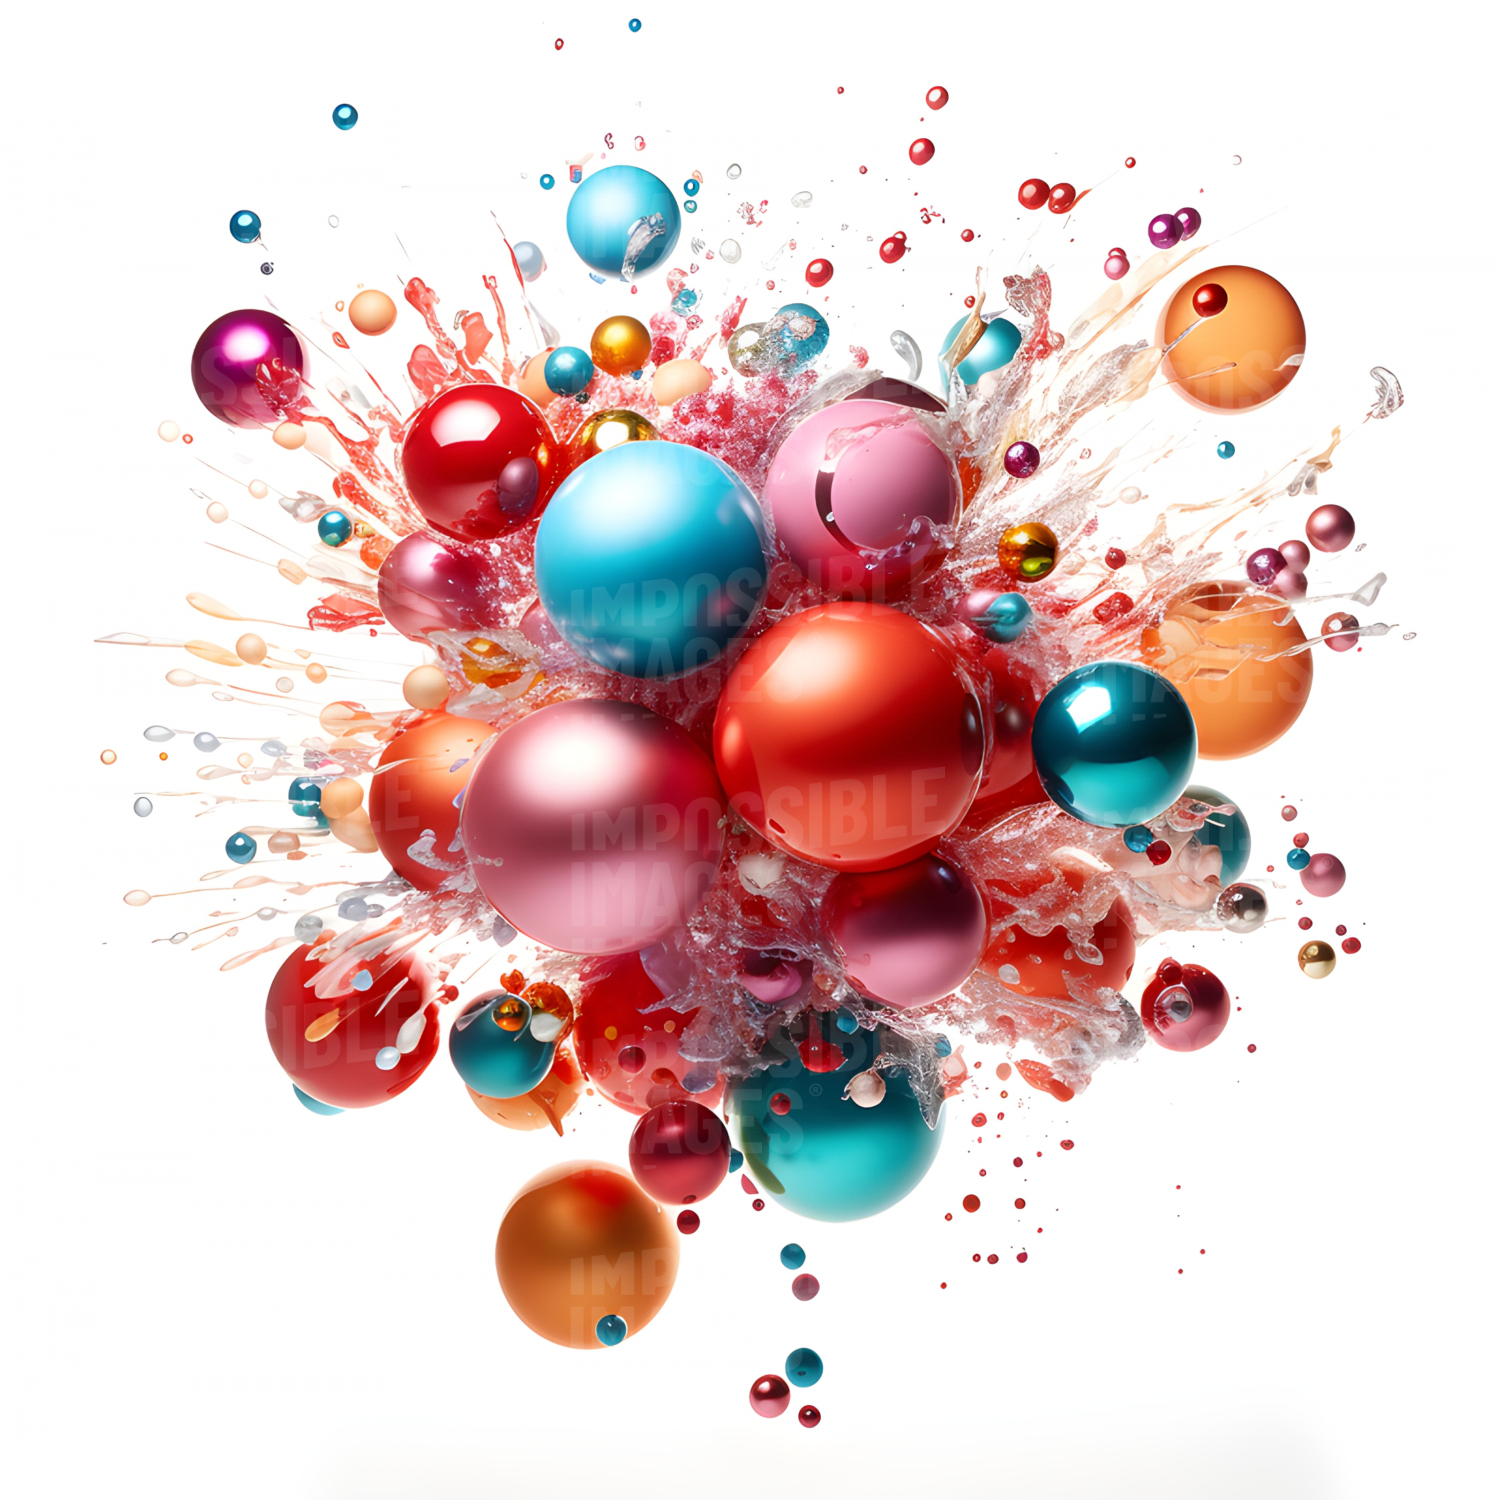 Exploding Baubles -  A Christmas Story  A family's Christmas is disrupted when a bauble explodes, sending them on a wild adventure to find the culprit and save the holiday.